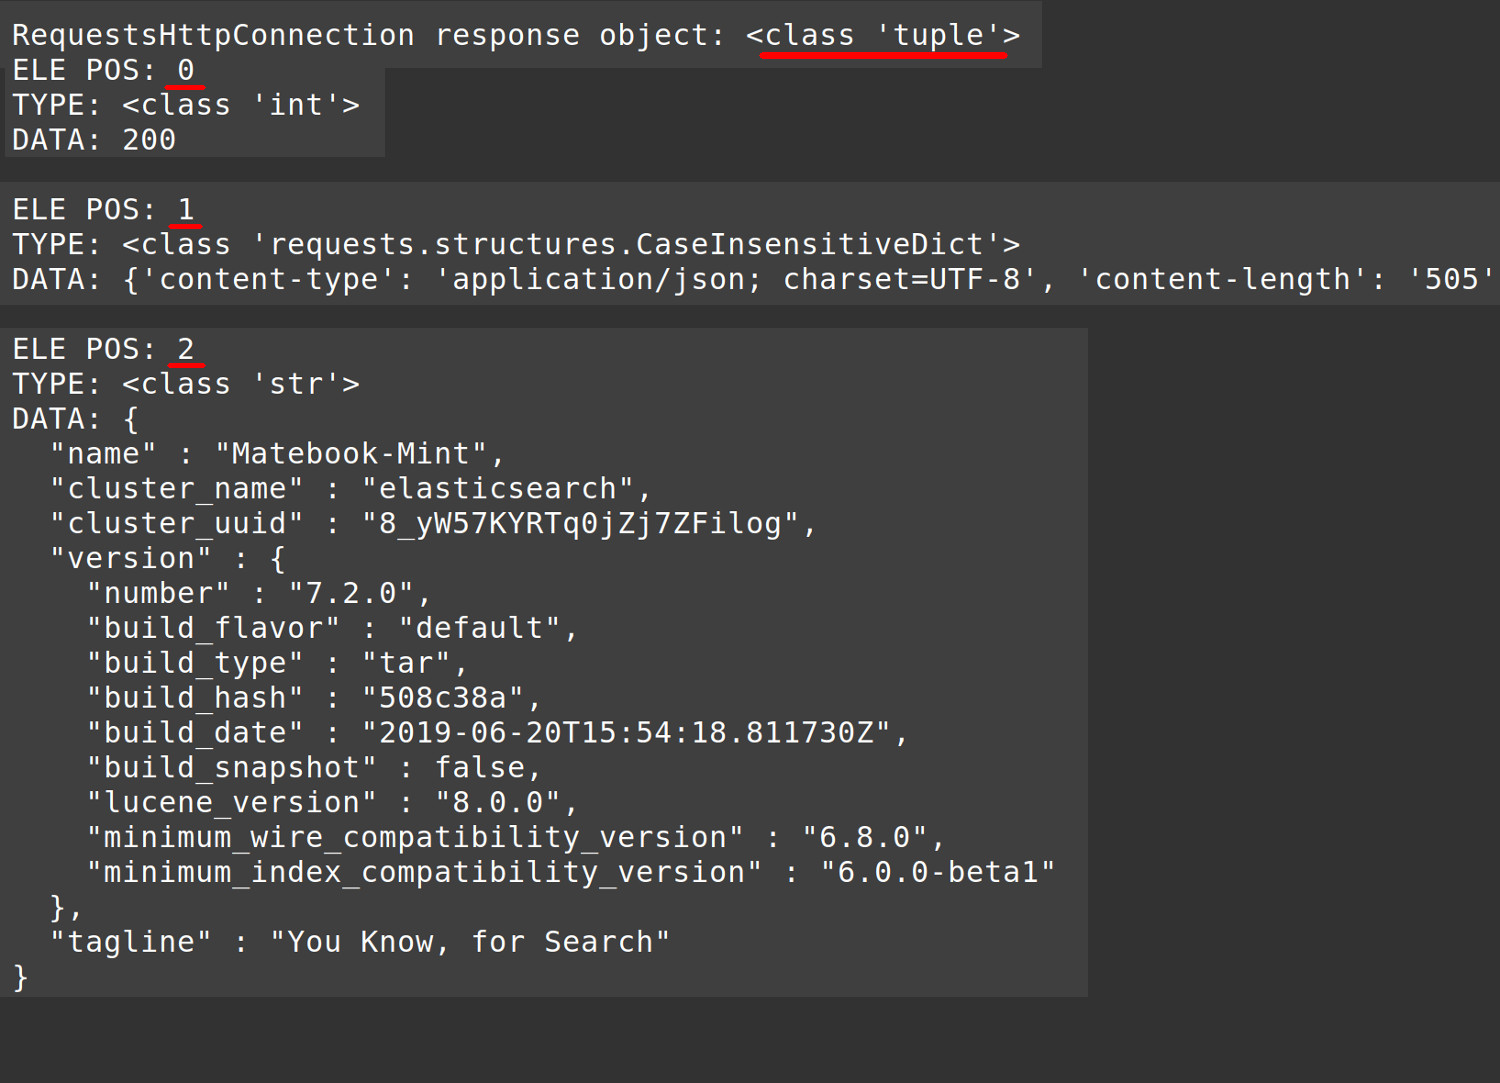 Screenshot of the RequestsHttpConnection response returned by Elasticsearch using Python